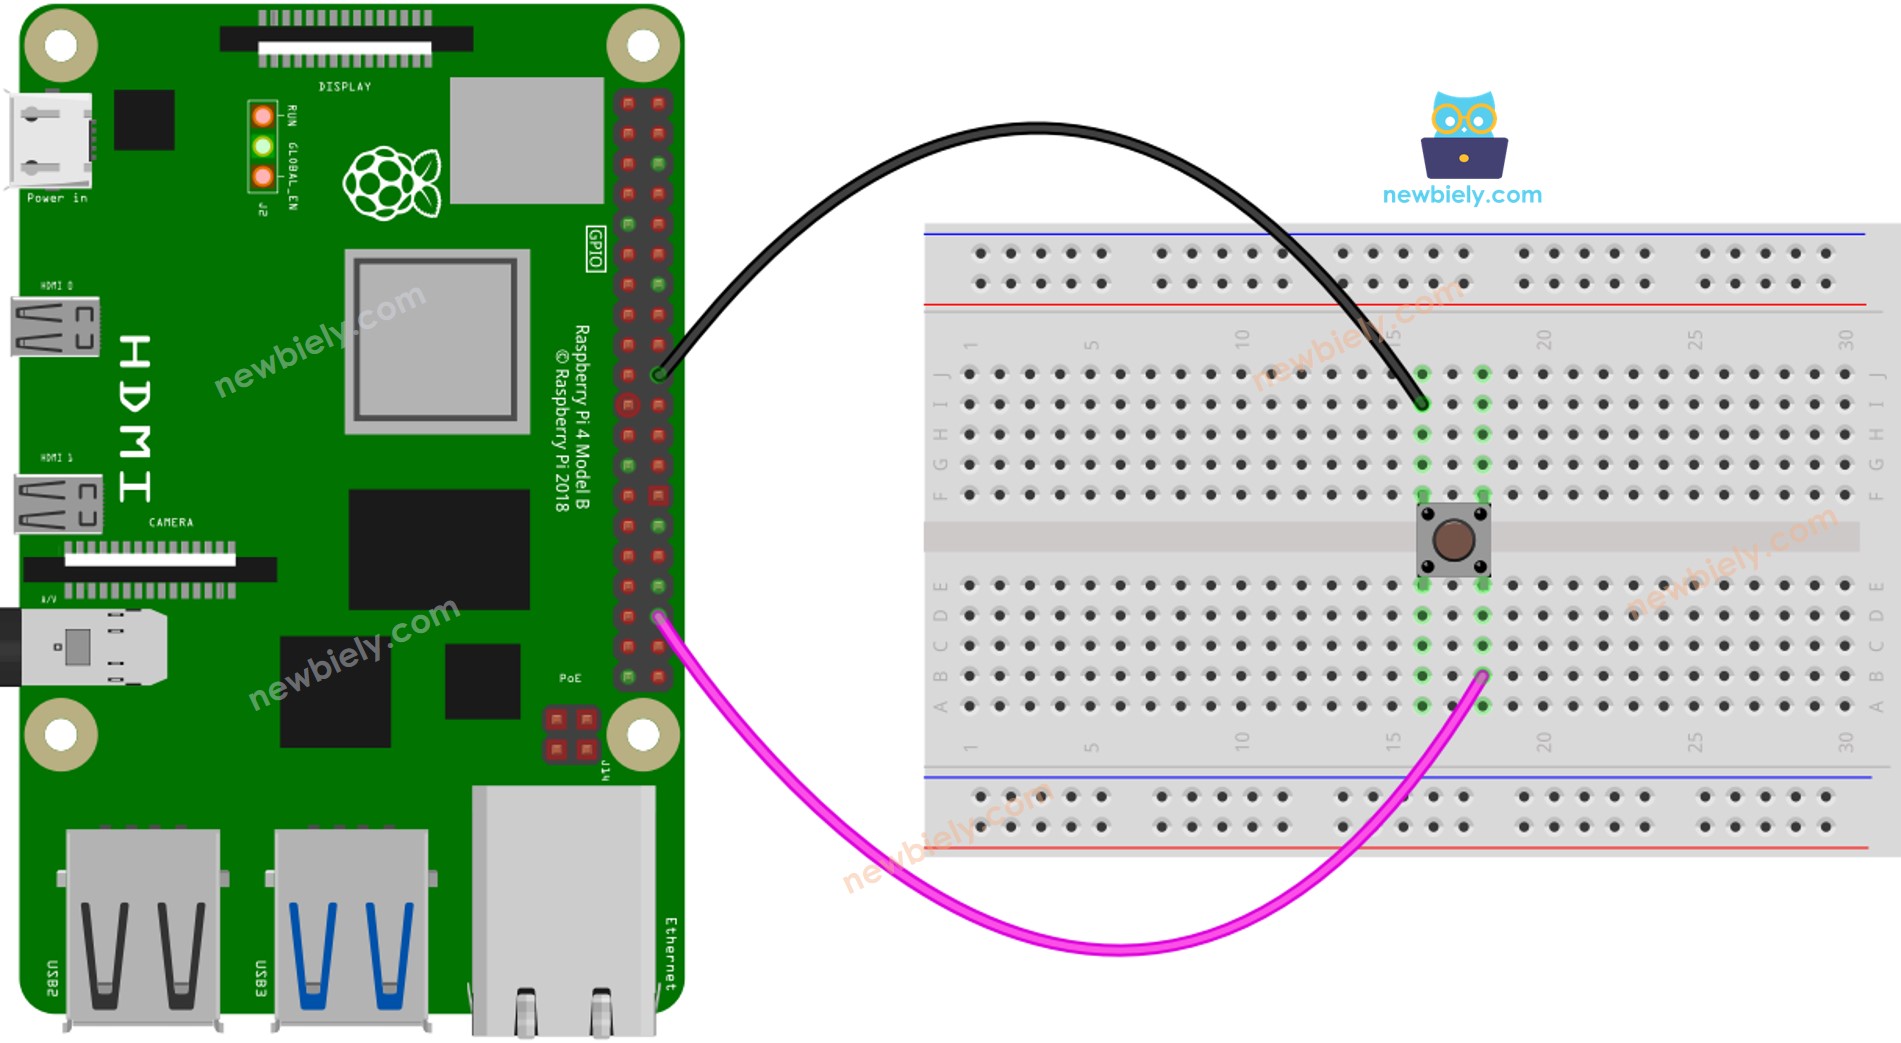 The wiring diagram between Raspberry Pi and Button